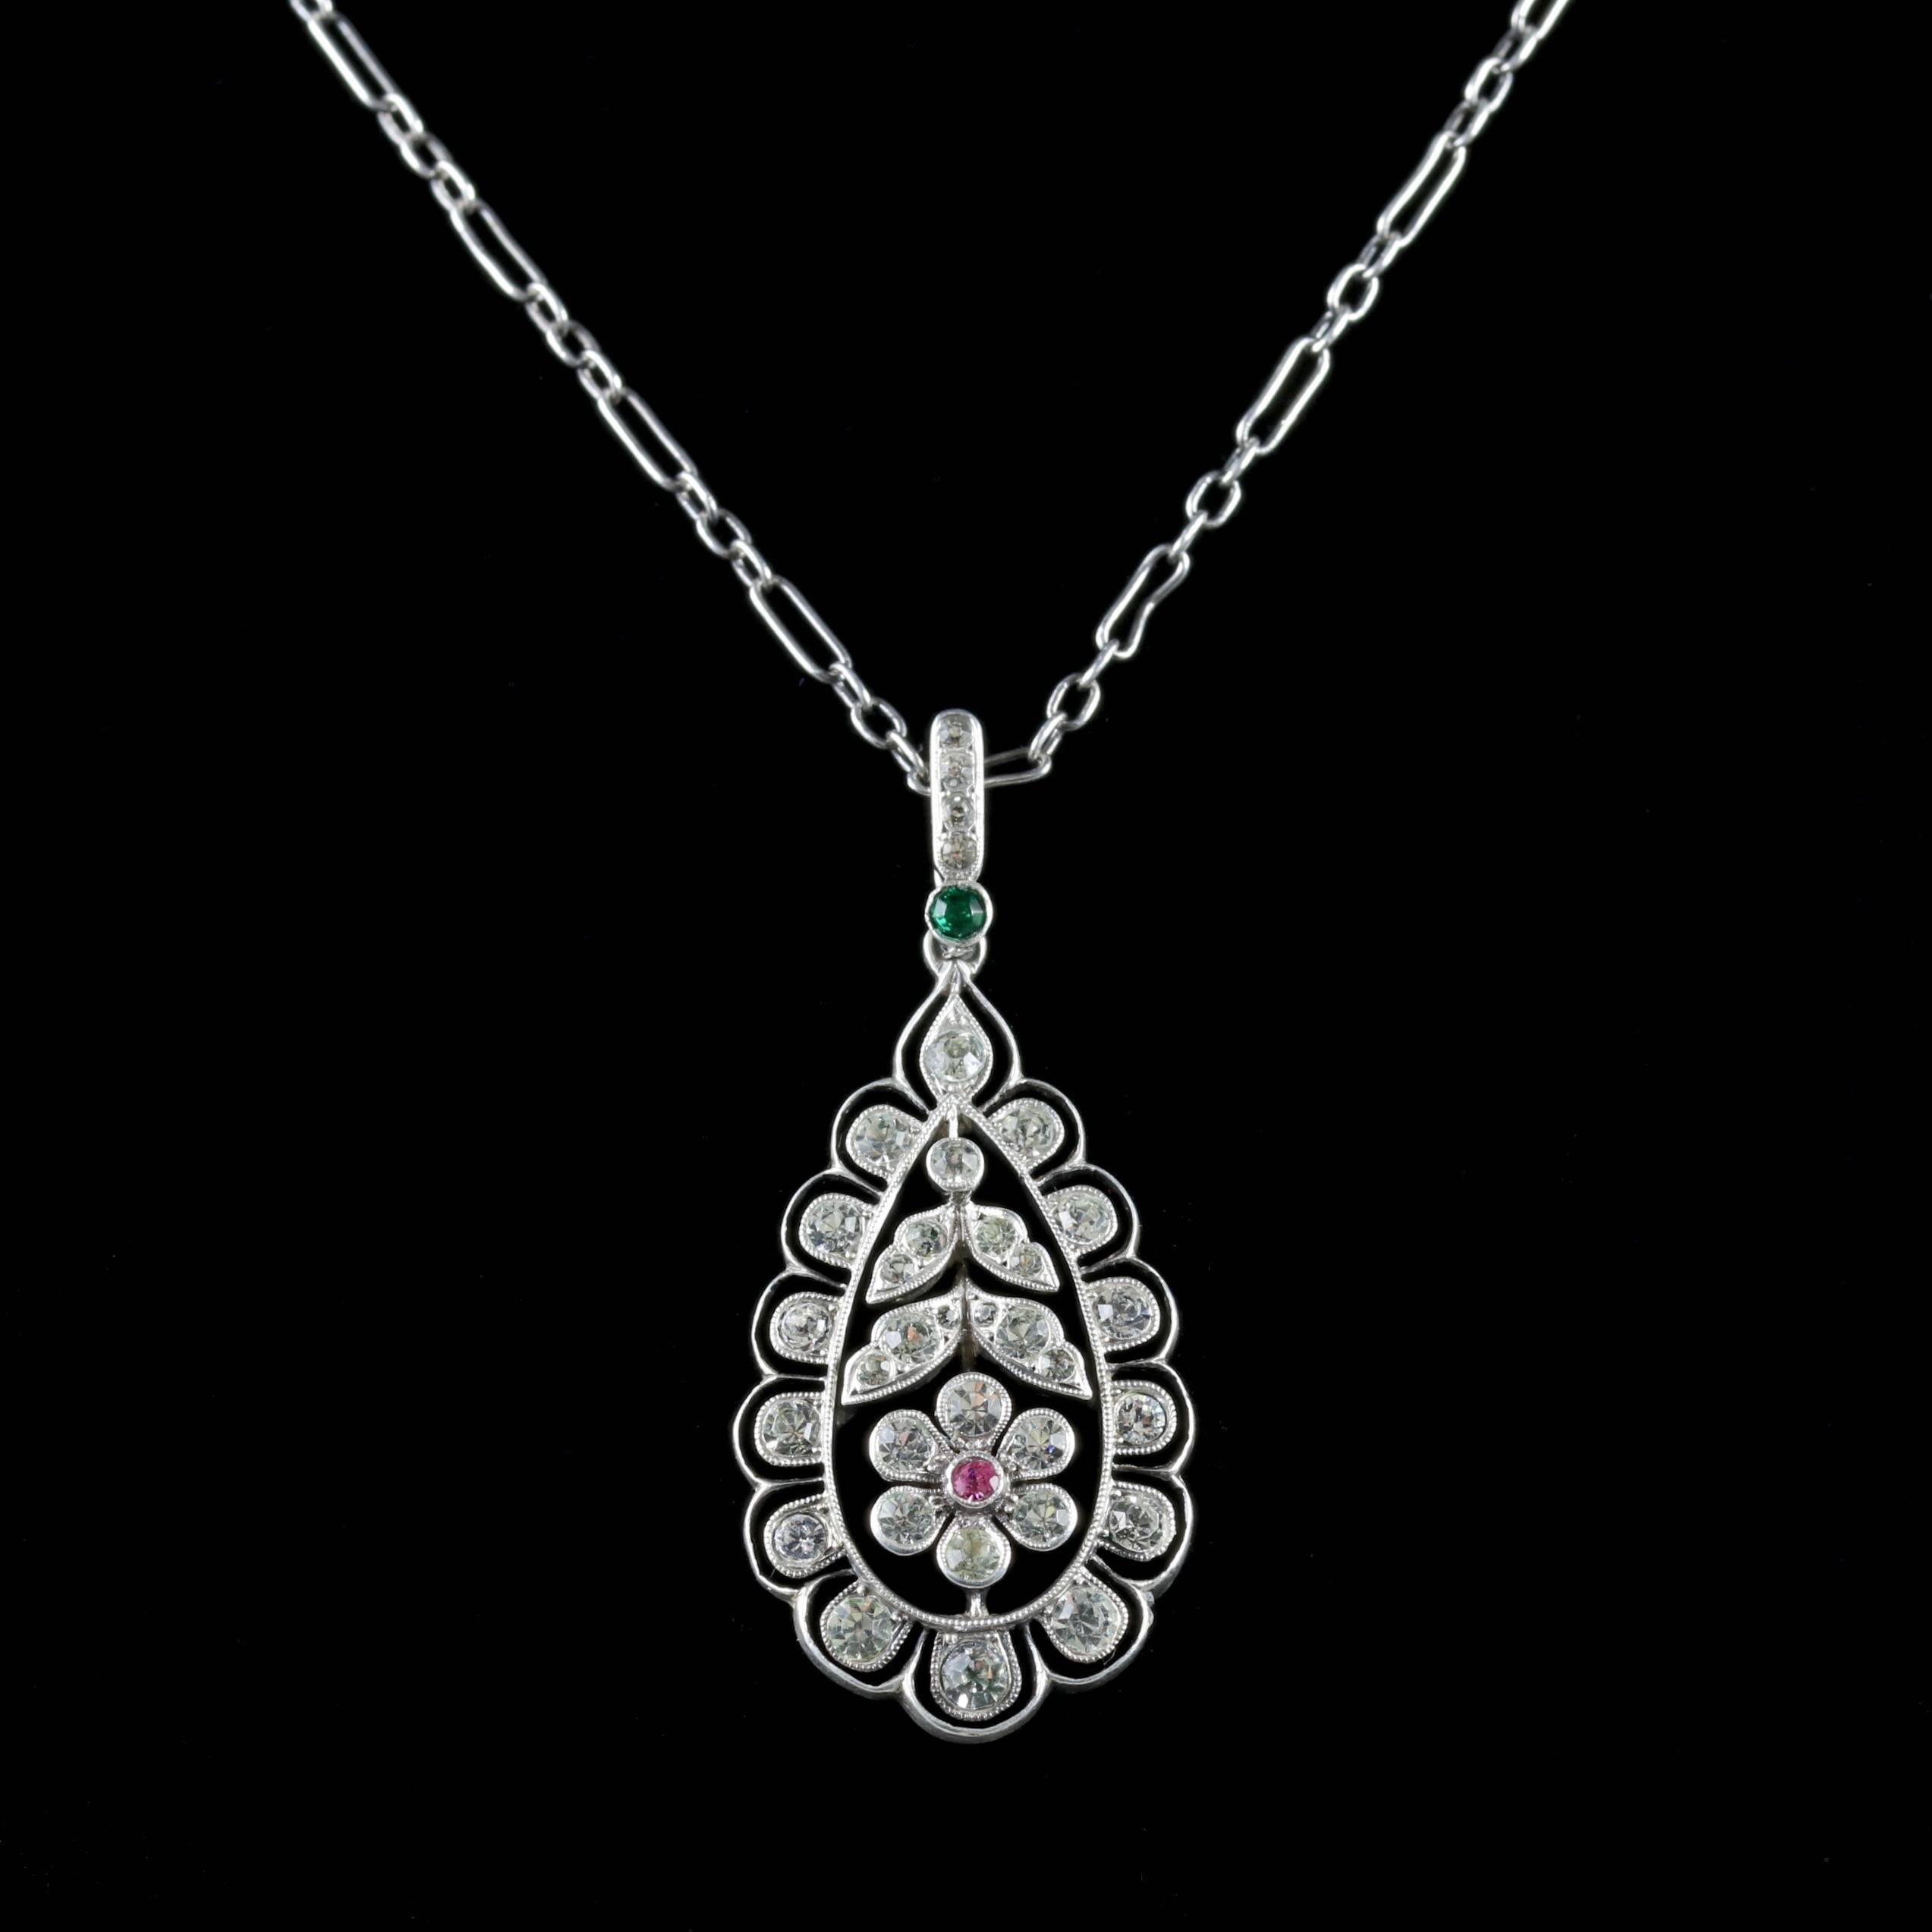 This fabulous antique Victorian flower pendant and chain was made representing the Suffragette movement, Circa 1900. 

The wonderful pendant is decorated in sparkling white, green and pink Paste Stones in a beautiful floral gallery.

Suffragettes